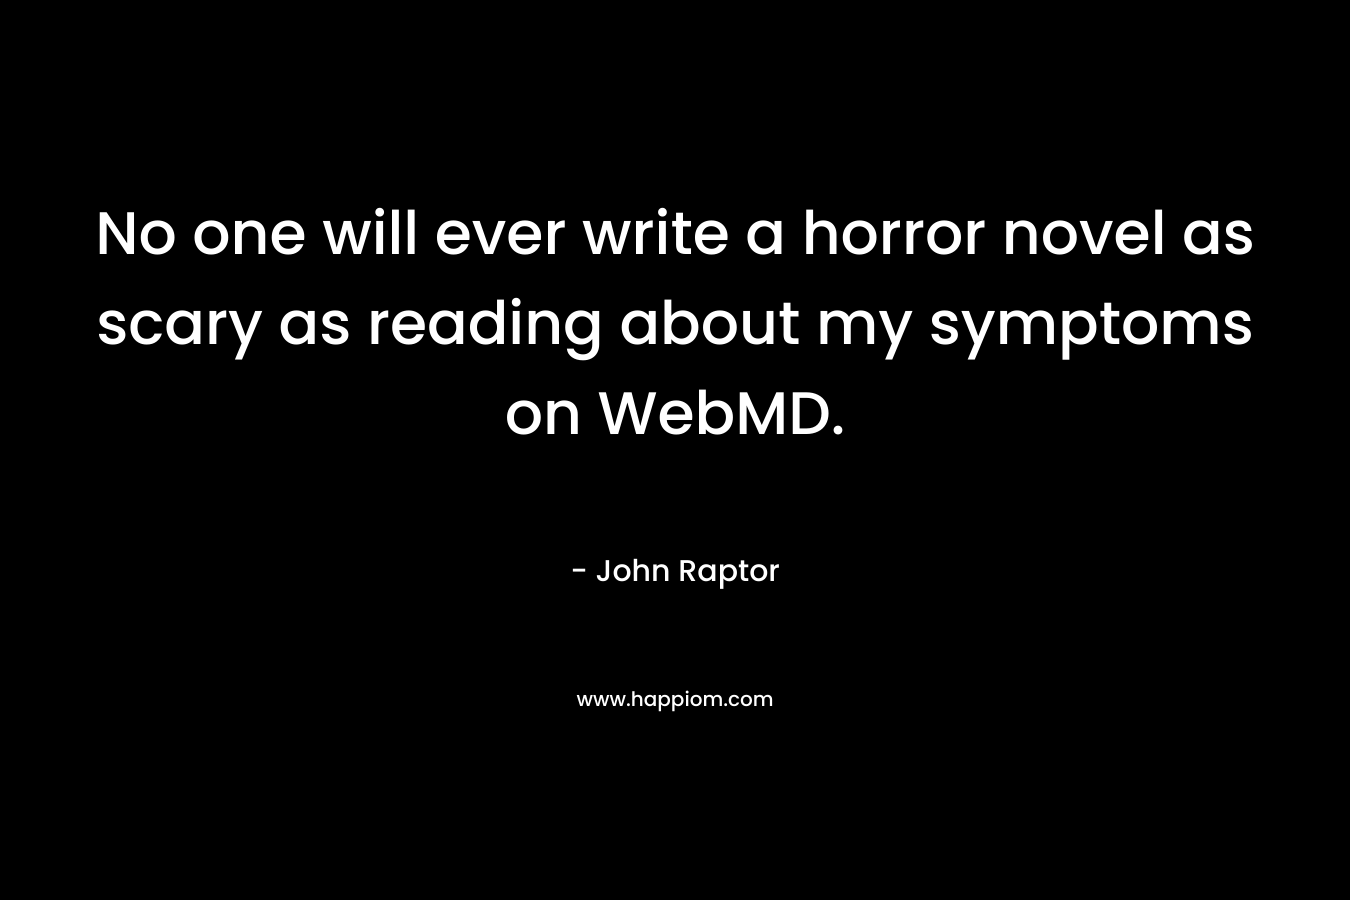 No one will ever write a horror novel as scary as reading about my symptoms on WebMD. – John Raptor